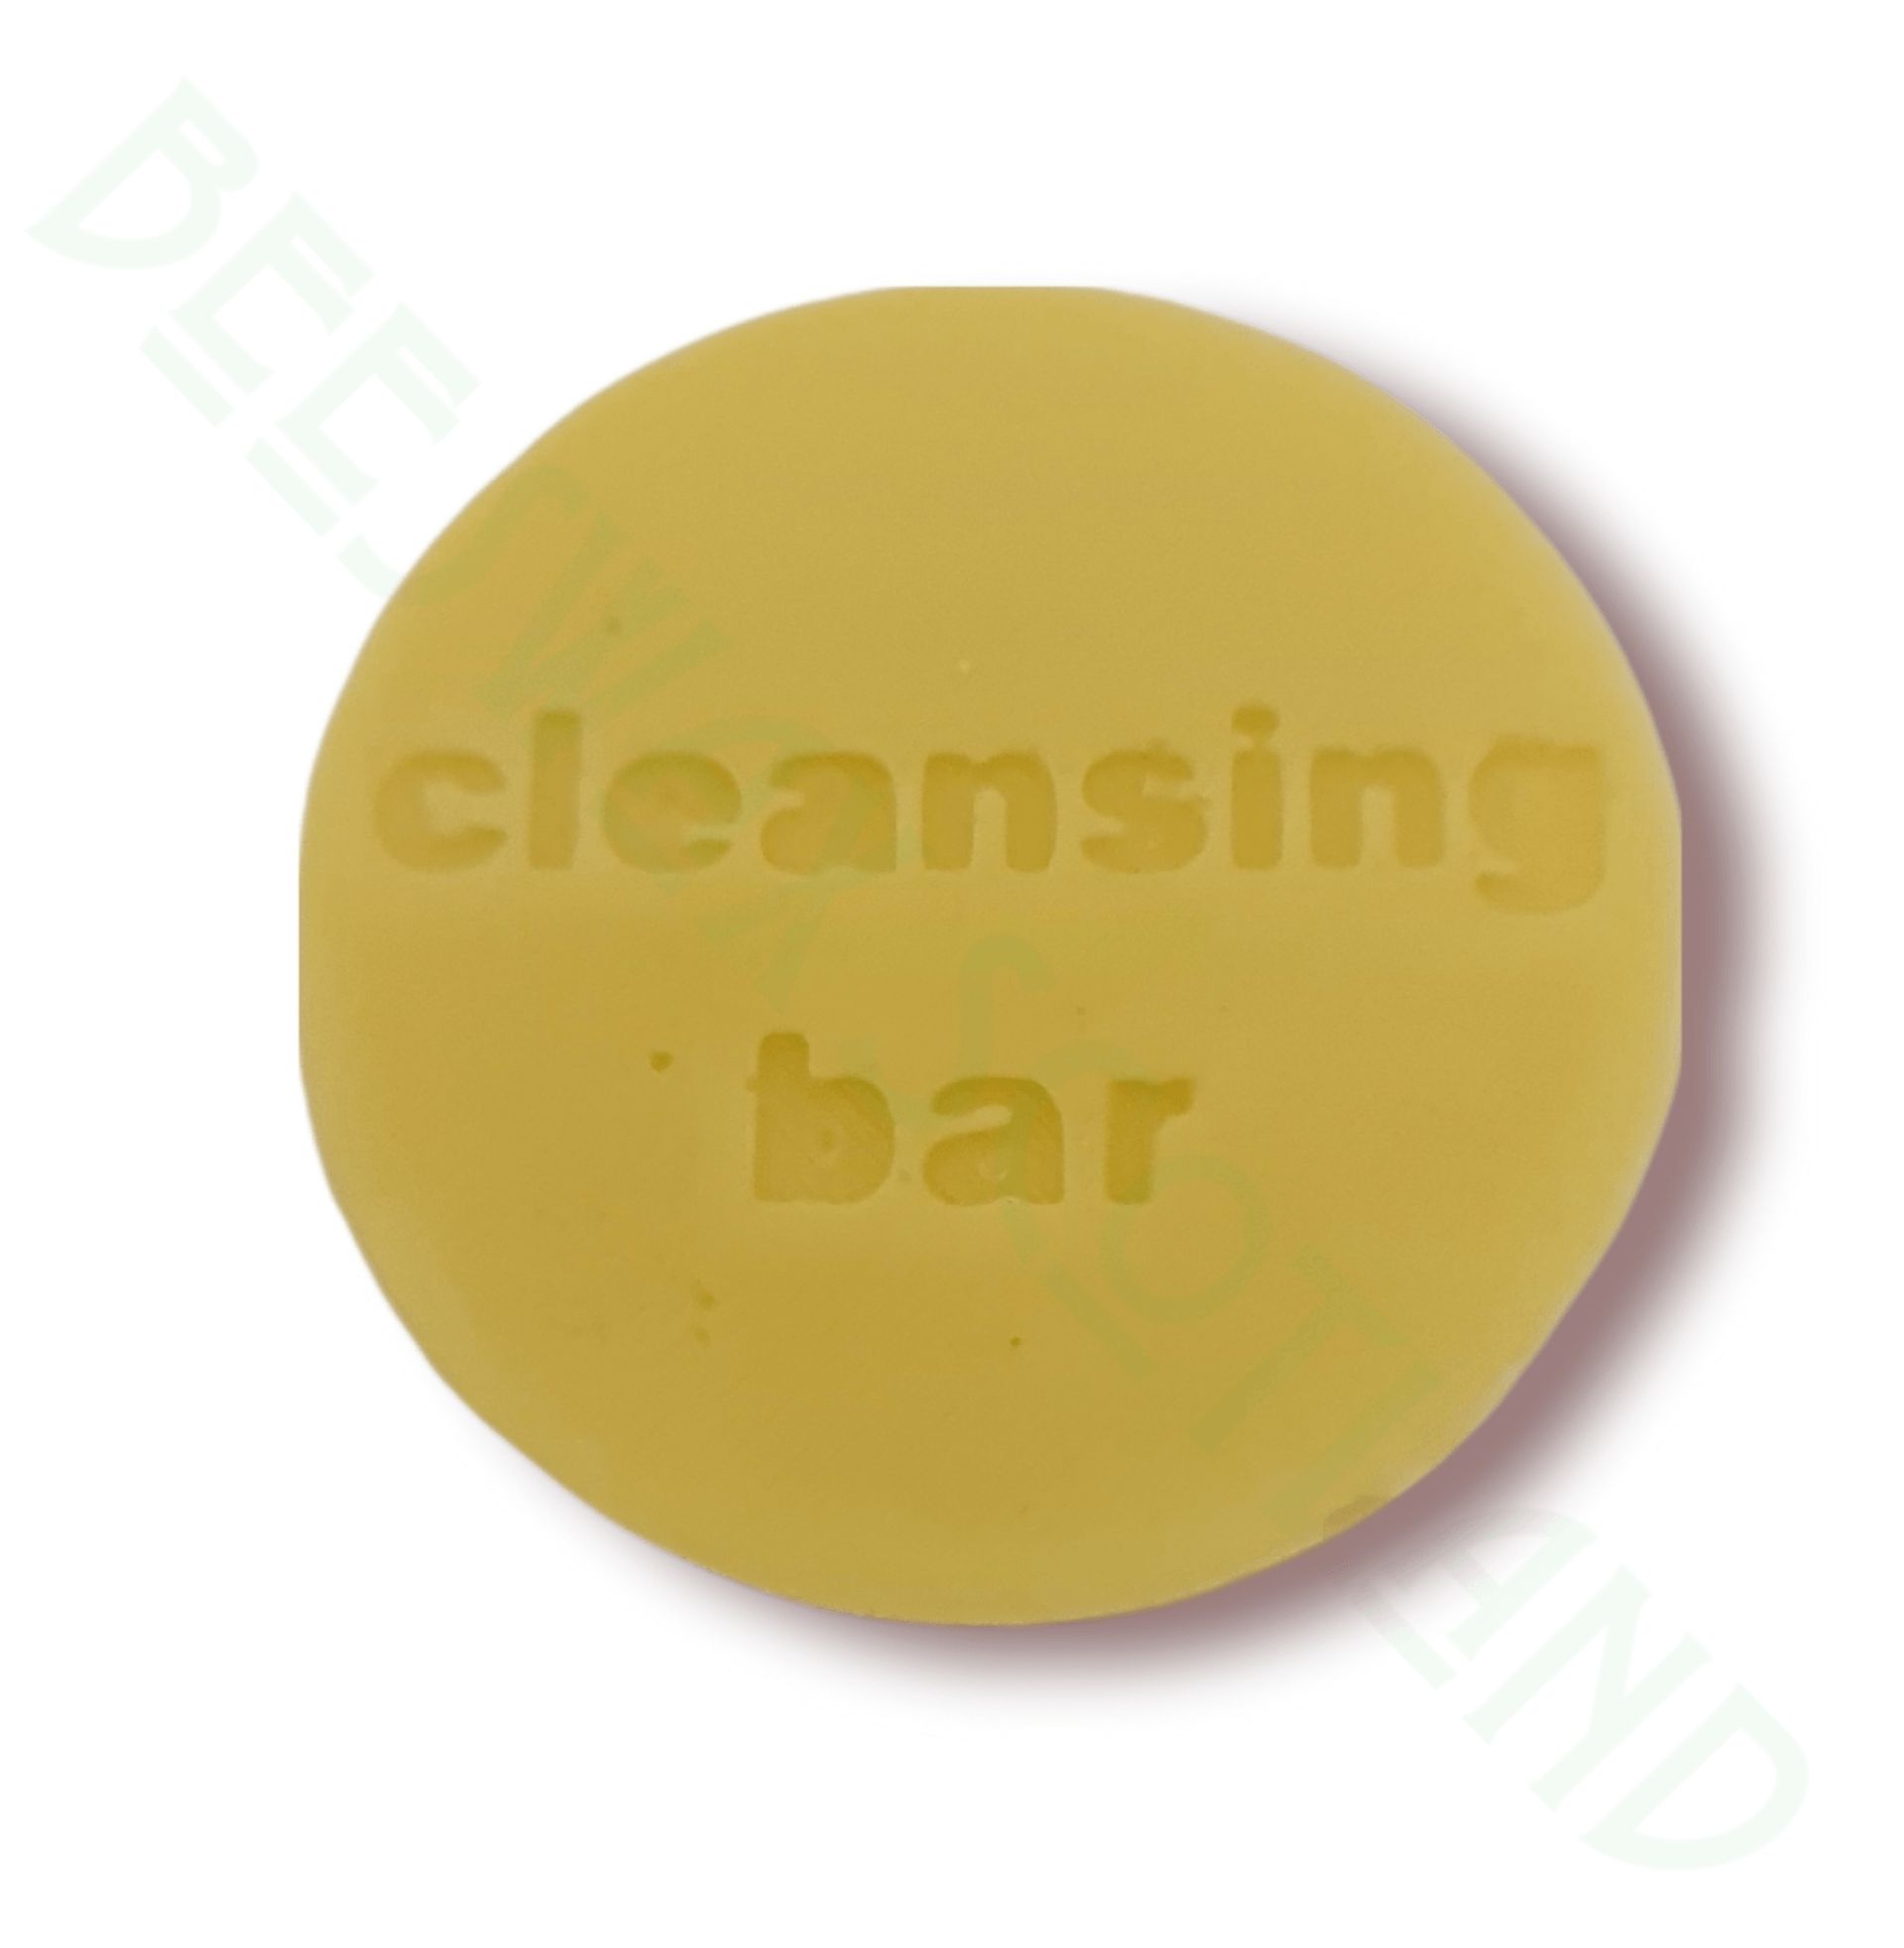 Beeswax Cleansing Bar